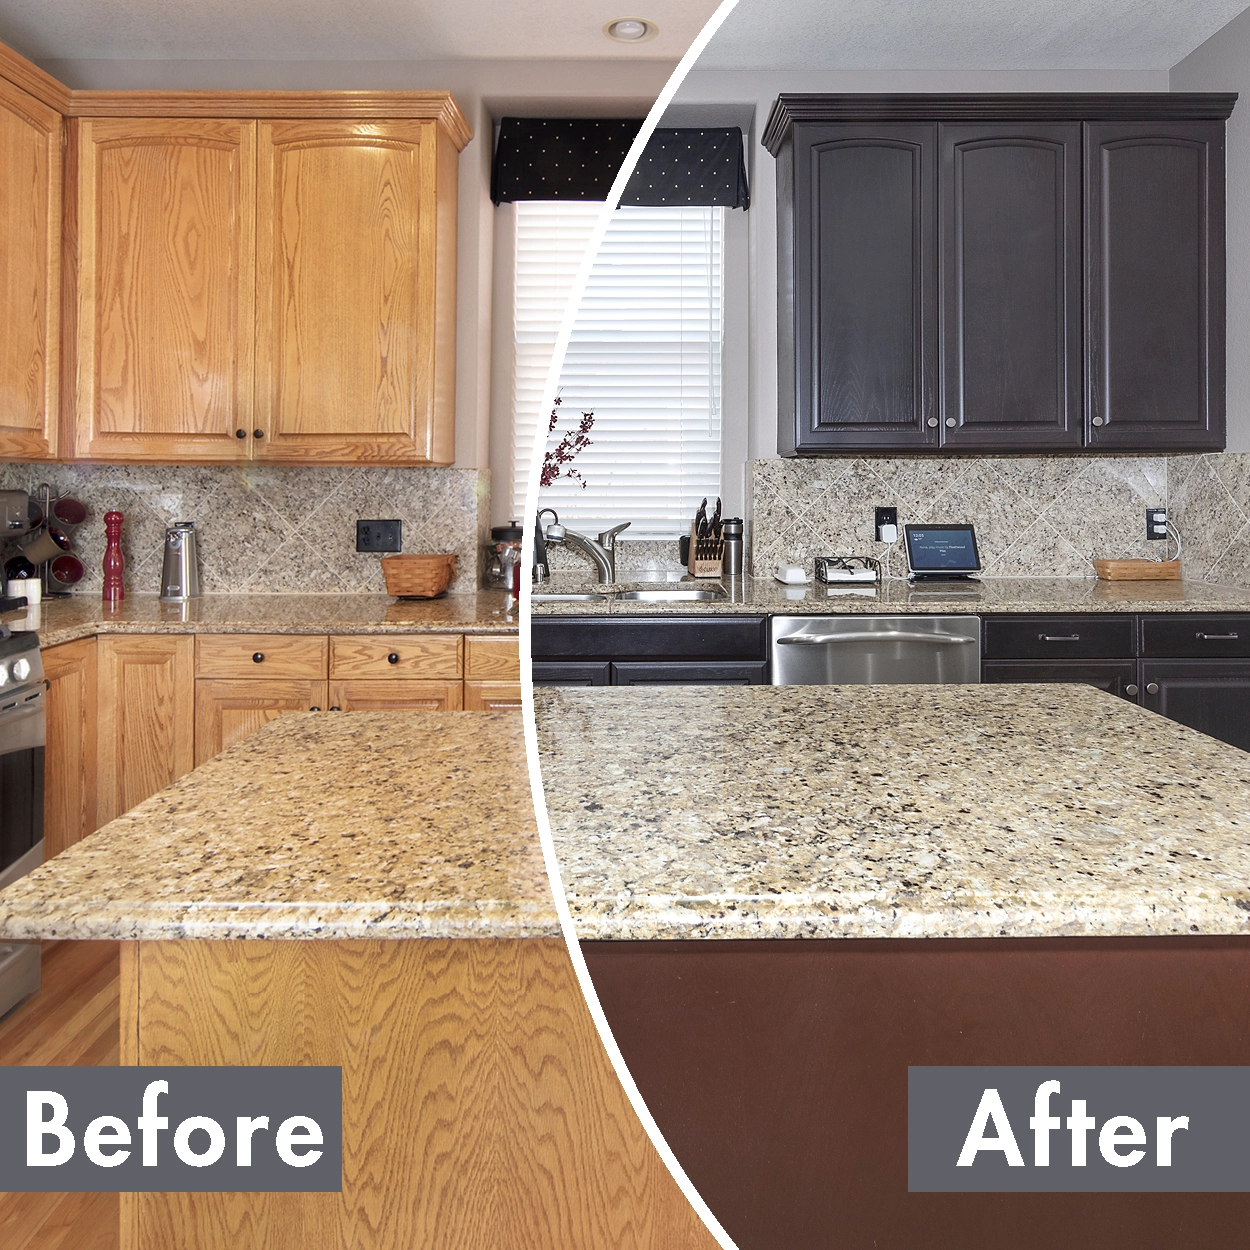 Cabinet Color Change N Hance, How To Recolor Kitchen Cabinets